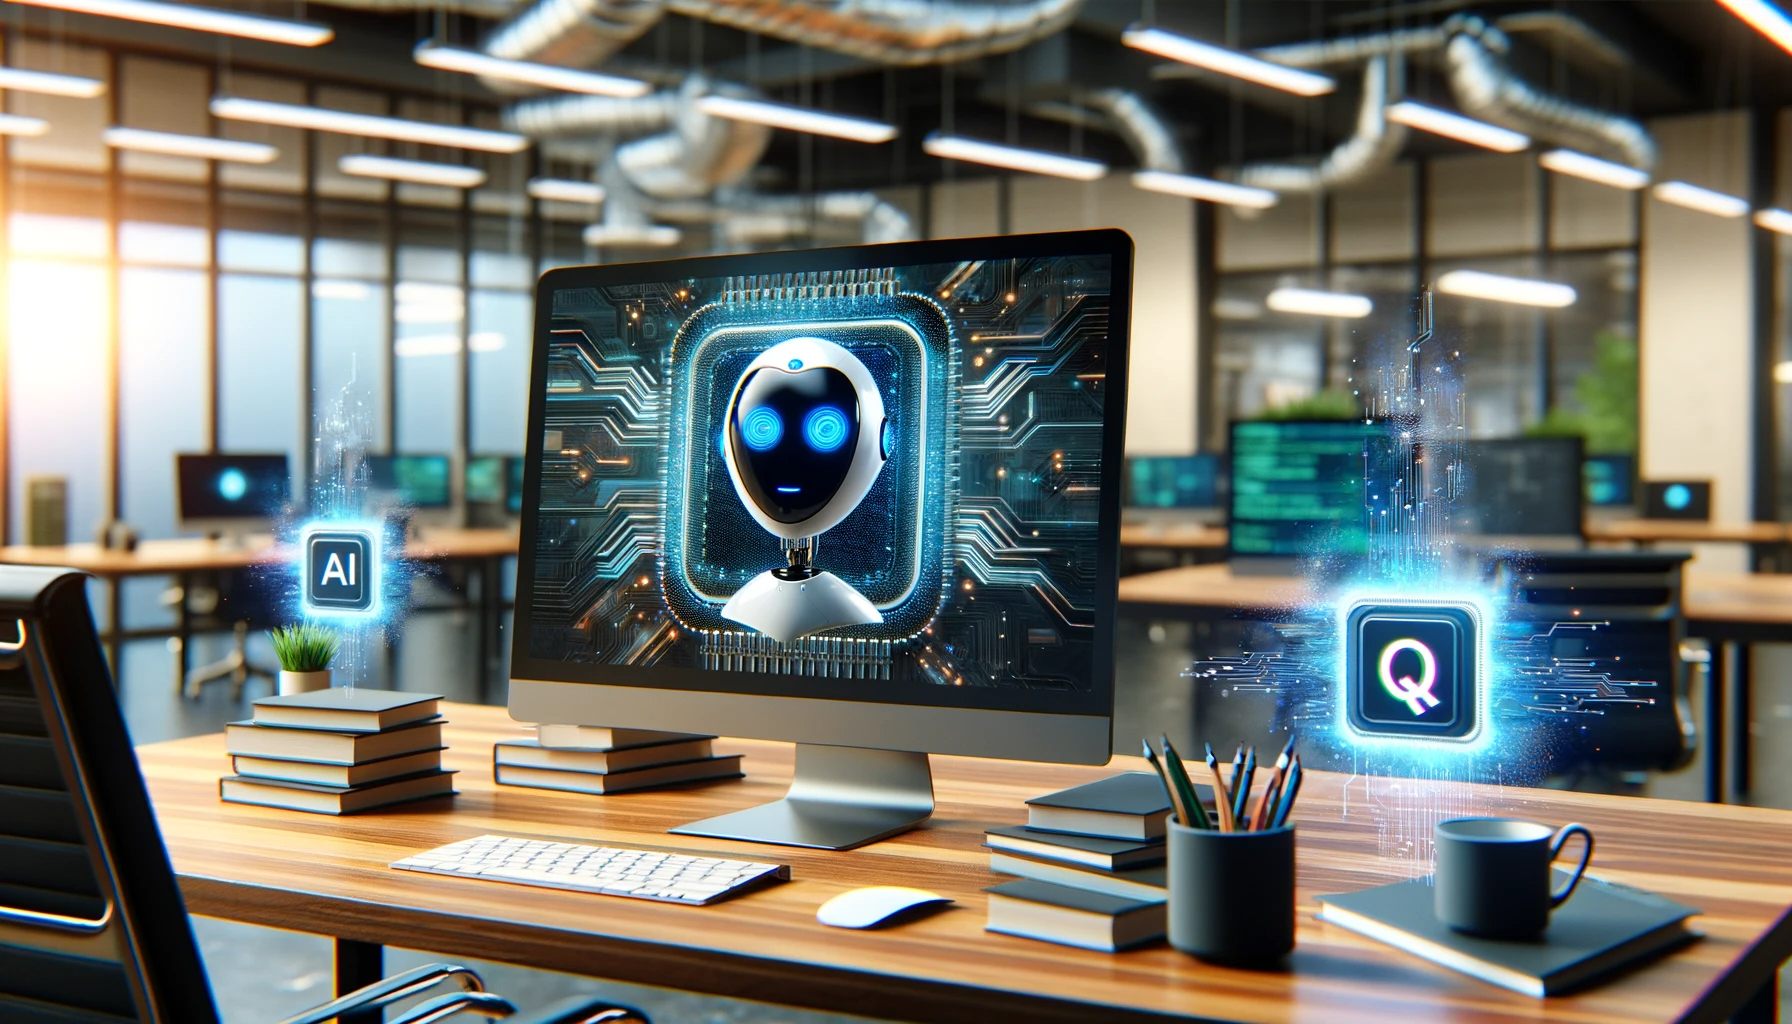 1701206107 DALL·E 2023 11 28 14.58.29 A news story cover image featuring the introduction of an AI chatbot named Q by a major web company set in a modern tech oriented workplace enviro